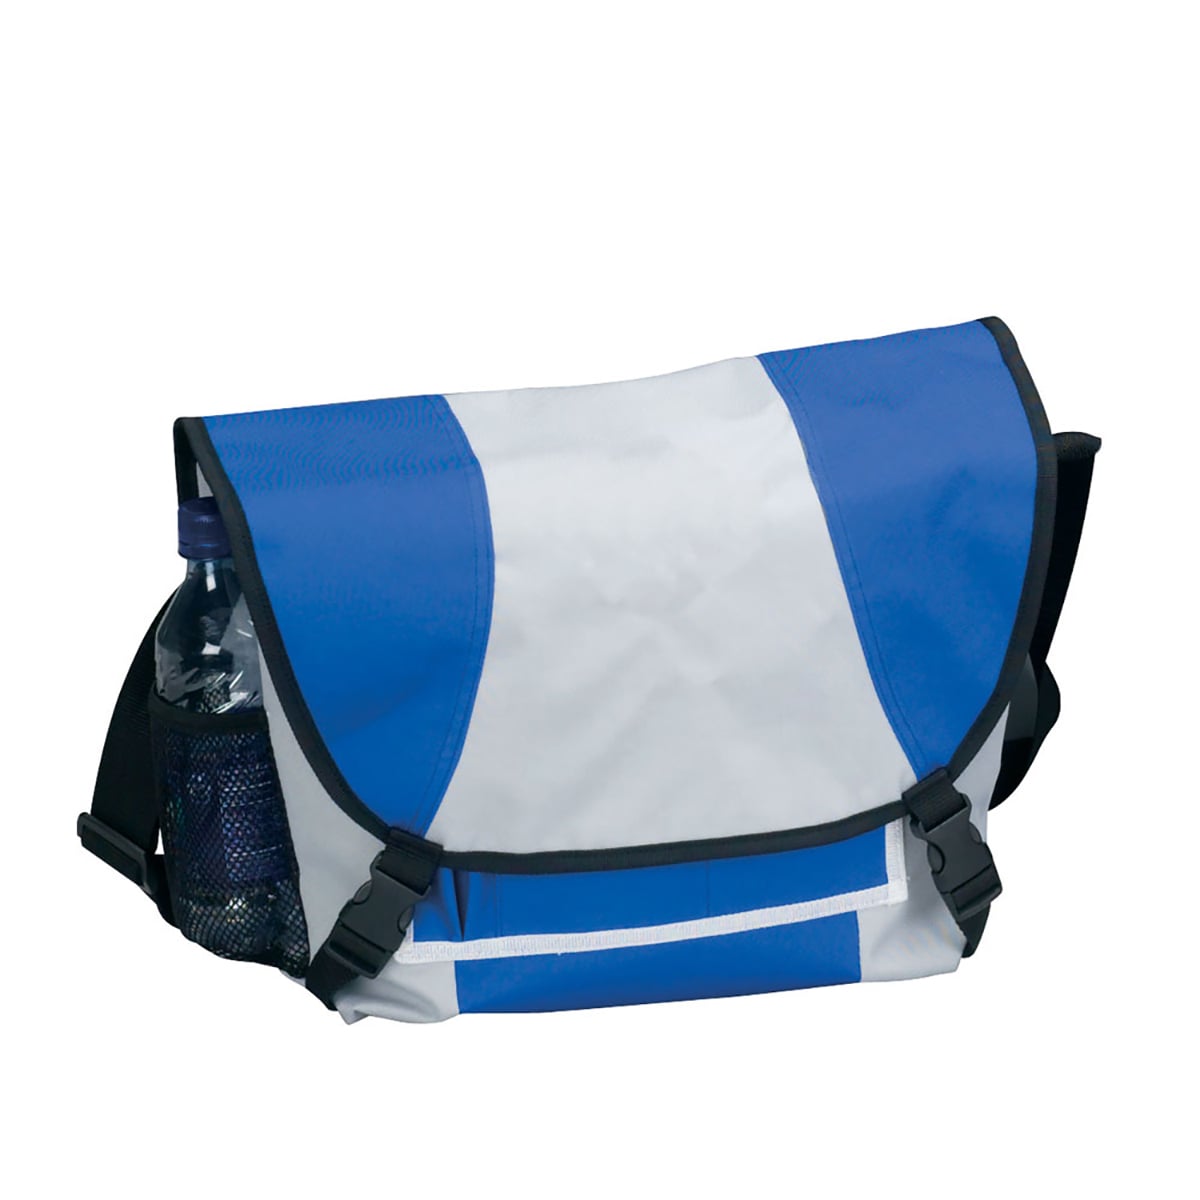 Goodhope Light Weight School Travel Flap Over Unisex Accessories Messenger Bag Blue - image 1 of 4